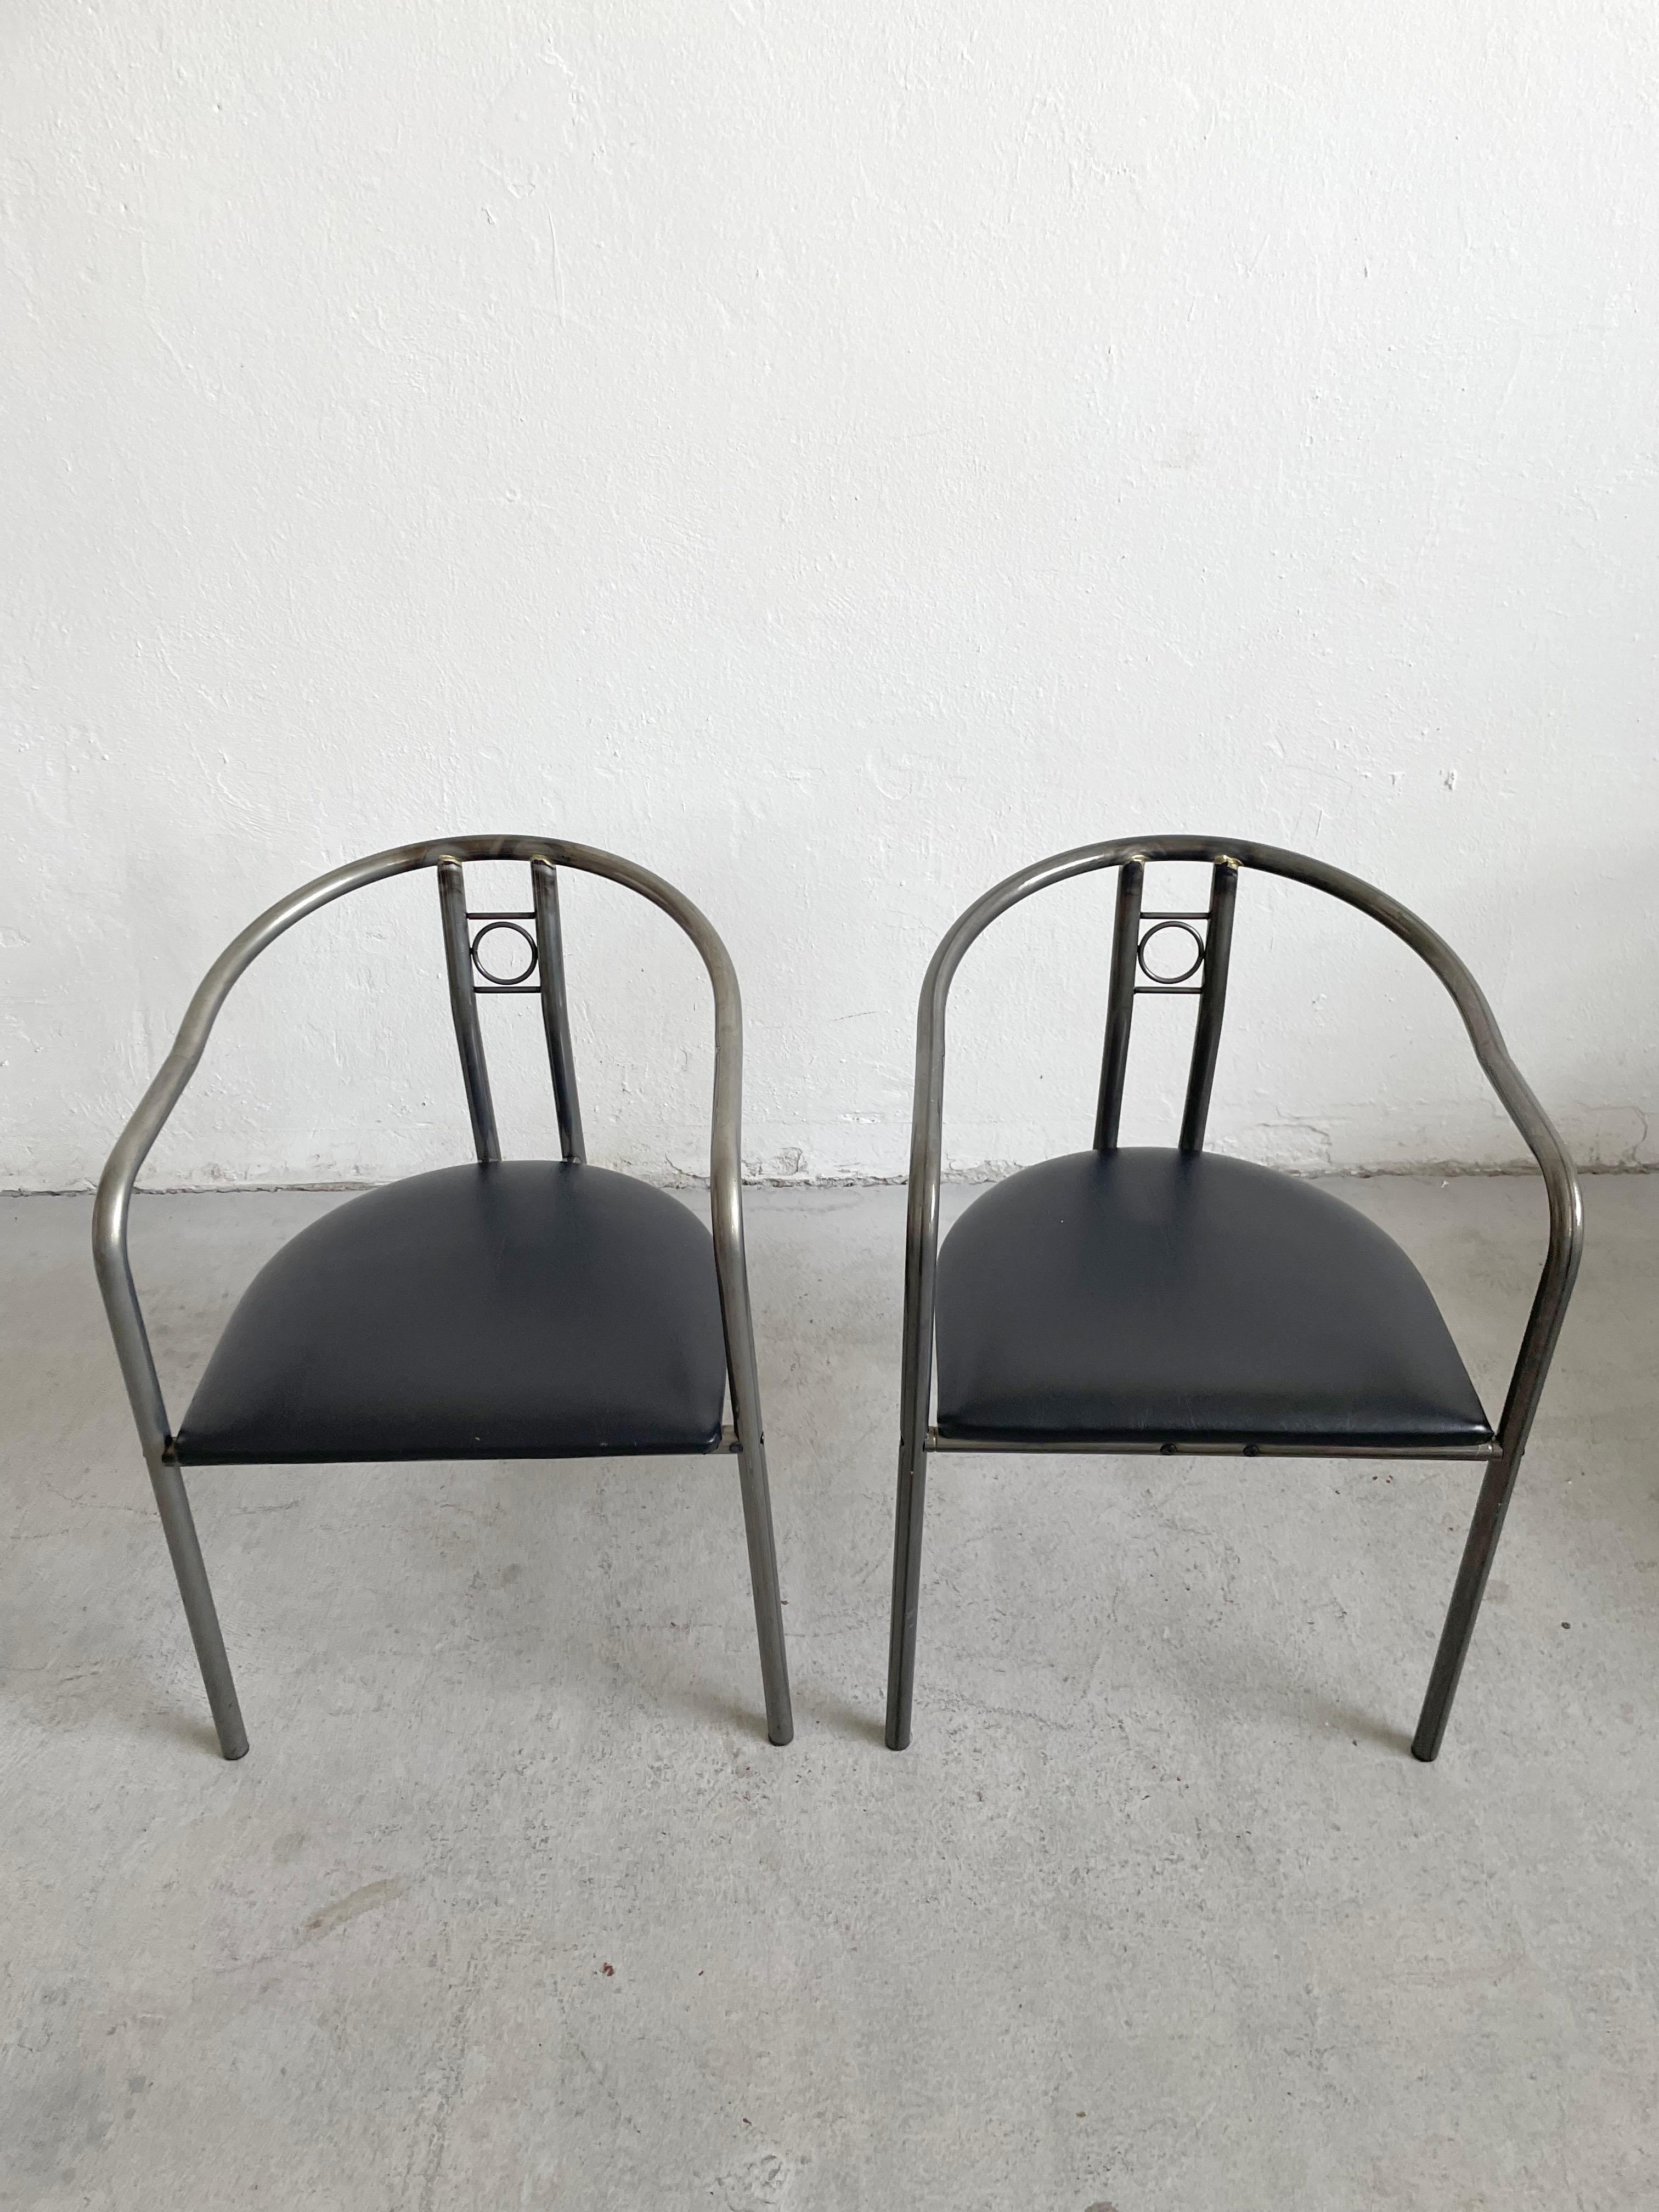 Set of 4 Postmodern Dining Chairs, Belgium 1980's In Good Condition For Sale In Zagreb, HR